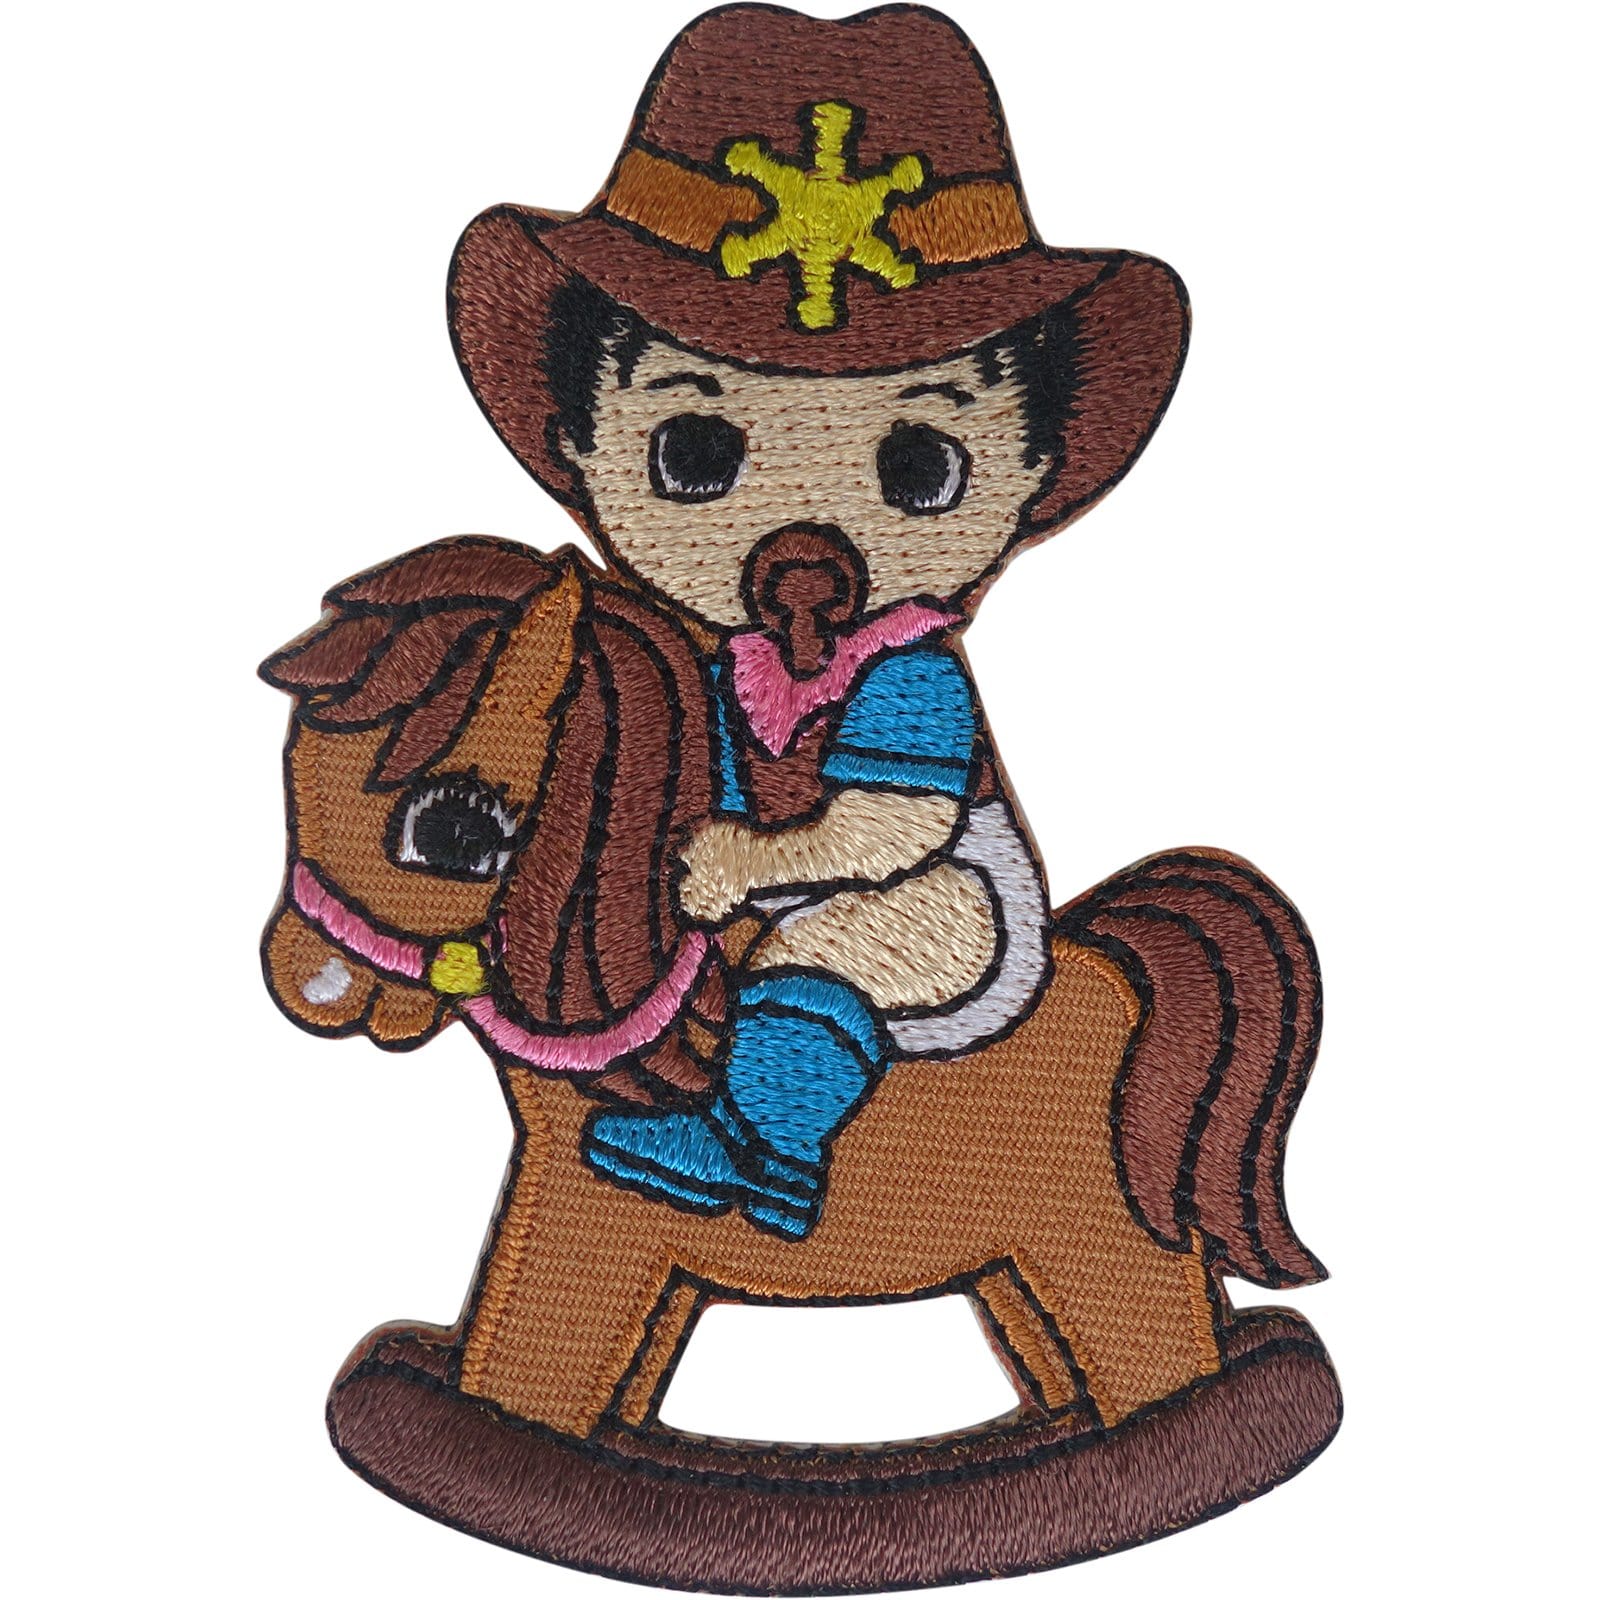 Cowboy Baby Rocking Horse Patch Iron Sew On Clothes Bag Shirt Embroidered Badge